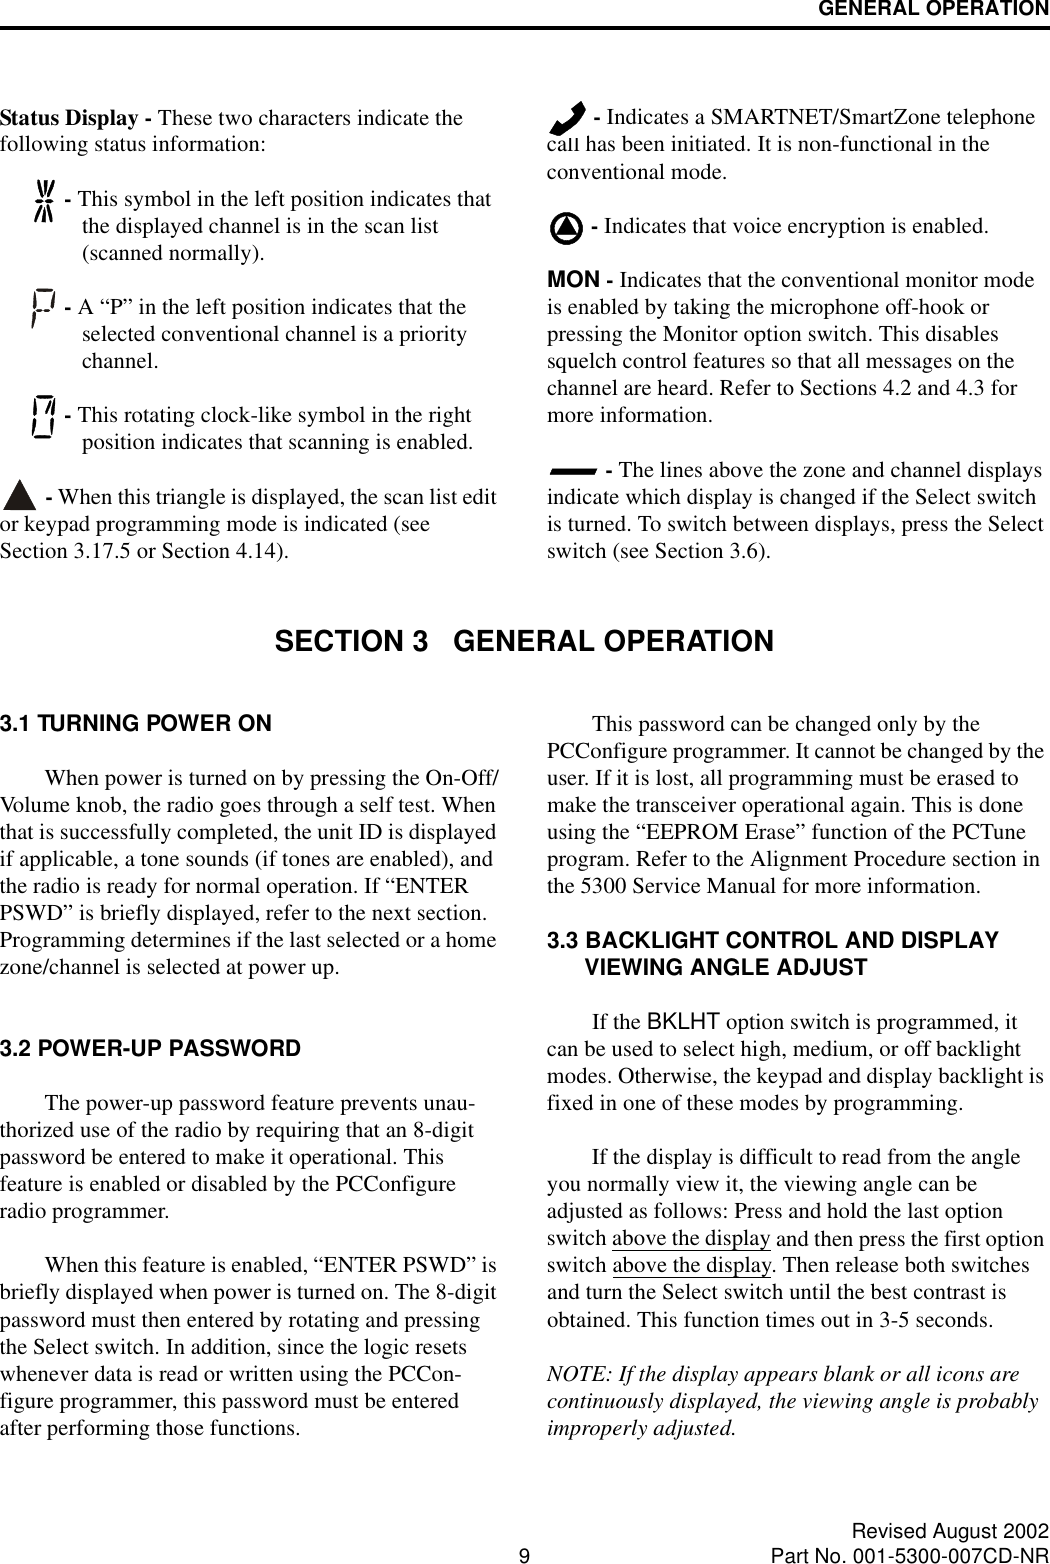 GENERAL OPERATION9Revised August 2002Part No. 001-5300-007CD-NRStatus Display - These two characters indicate the following status information: - This symbol in the left position indicates that the displayed channel is in the scan list (scanned normally). - A “P” in the left position indicates that the selected conventional channel is a priority channel.  - This rotating clock-like symbol in the right position indicates that scanning is enabled.  - When this triangle is displayed, the scan list edit or keypad programming mode is indicated (see Section 3.17.5 or Section 4.14). - Indicates a SMARTNET/SmartZone telephone call has been initiated. It is non-functional in the conventional mode. - Indicates that voice encryption is enabled.MON - Indicates that the conventional monitor mode is enabled by taking the microphone off-hook or pressing the Monitor option switch. This disables squelch control features so that all messages on the channel are heard. Refer to Sections 4.2 and 4.3 for more information. - The lines above the zone and channel displays indicate which display is changed if the Select switch is turned. To switch between displays, press the Select switch (see Section 3.6).SECTION 3   GENERAL OPERATION3.1 TURNING POWER ONWhen power is turned on by pressing the On-Off/Volume knob, the radio goes through a self test. When that is successfully completed, the unit ID is displayed if applicable, a tone sounds (if tones are enabled), and the radio is ready for normal operation. If “ENTER PSWD” is briefly displayed, refer to the next section. Programming determines if the last selected or a home zone/channel is selected at power up.3.2 POWER-UP PASSWORDThe power-up password feature prevents unau-thorized use of the radio by requiring that an 8-digit password be entered to make it operational. This feature is enabled or disabled by the PCConfigure radio programmer. When this feature is enabled, “ENTER PSWD” is briefly displayed when power is turned on. The 8-digit password must then entered by rotating and pressing the Select switch. In addition, since the logic resets whenever data is read or written using the PCCon-figure programmer, this password must be entered after performing those functions.This password can be changed only by the PCConfigure programmer. It cannot be changed by the user. If it is lost, all programming must be erased to make the transceiver operational again. This is done using the “EEPROM Erase” function of the PCTune program. Refer to the Alignment Procedure section in the 5300 Service Manual for more information.3.3 BACKLIGHT CONTROL AND DISPLAY VIEWING ANGLE ADJUST If the BKLHT option switch is programmed, it can be used to select high, medium, or off backlight modes. Otherwise, the keypad and display backlight is fixed in one of these modes by programming. If the display is difficult to read from the angle you normally view it, the viewing angle can be adjusted as follows: Press and hold the last option switch above the display and then press the first option switch above the display. Then release both switches and turn the Select switch until the best contrast is obtained. This function times out in 3-5 seconds.NOTE: If the display appears blank or all icons are continuously displayed, the viewing angle is probably improperly adjusted.